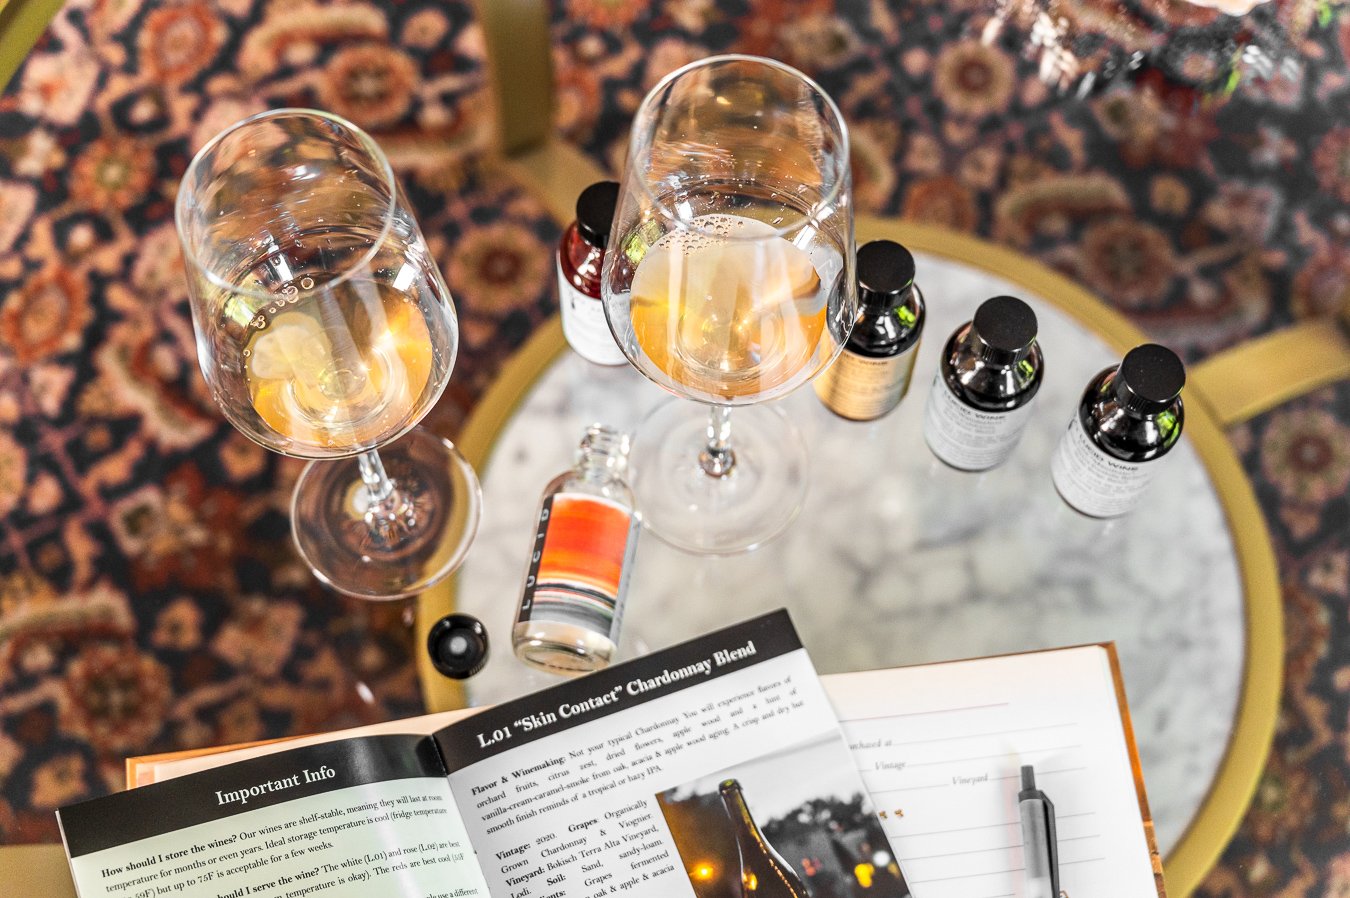 Wine Tasting Party Essentials - Cavit Collection